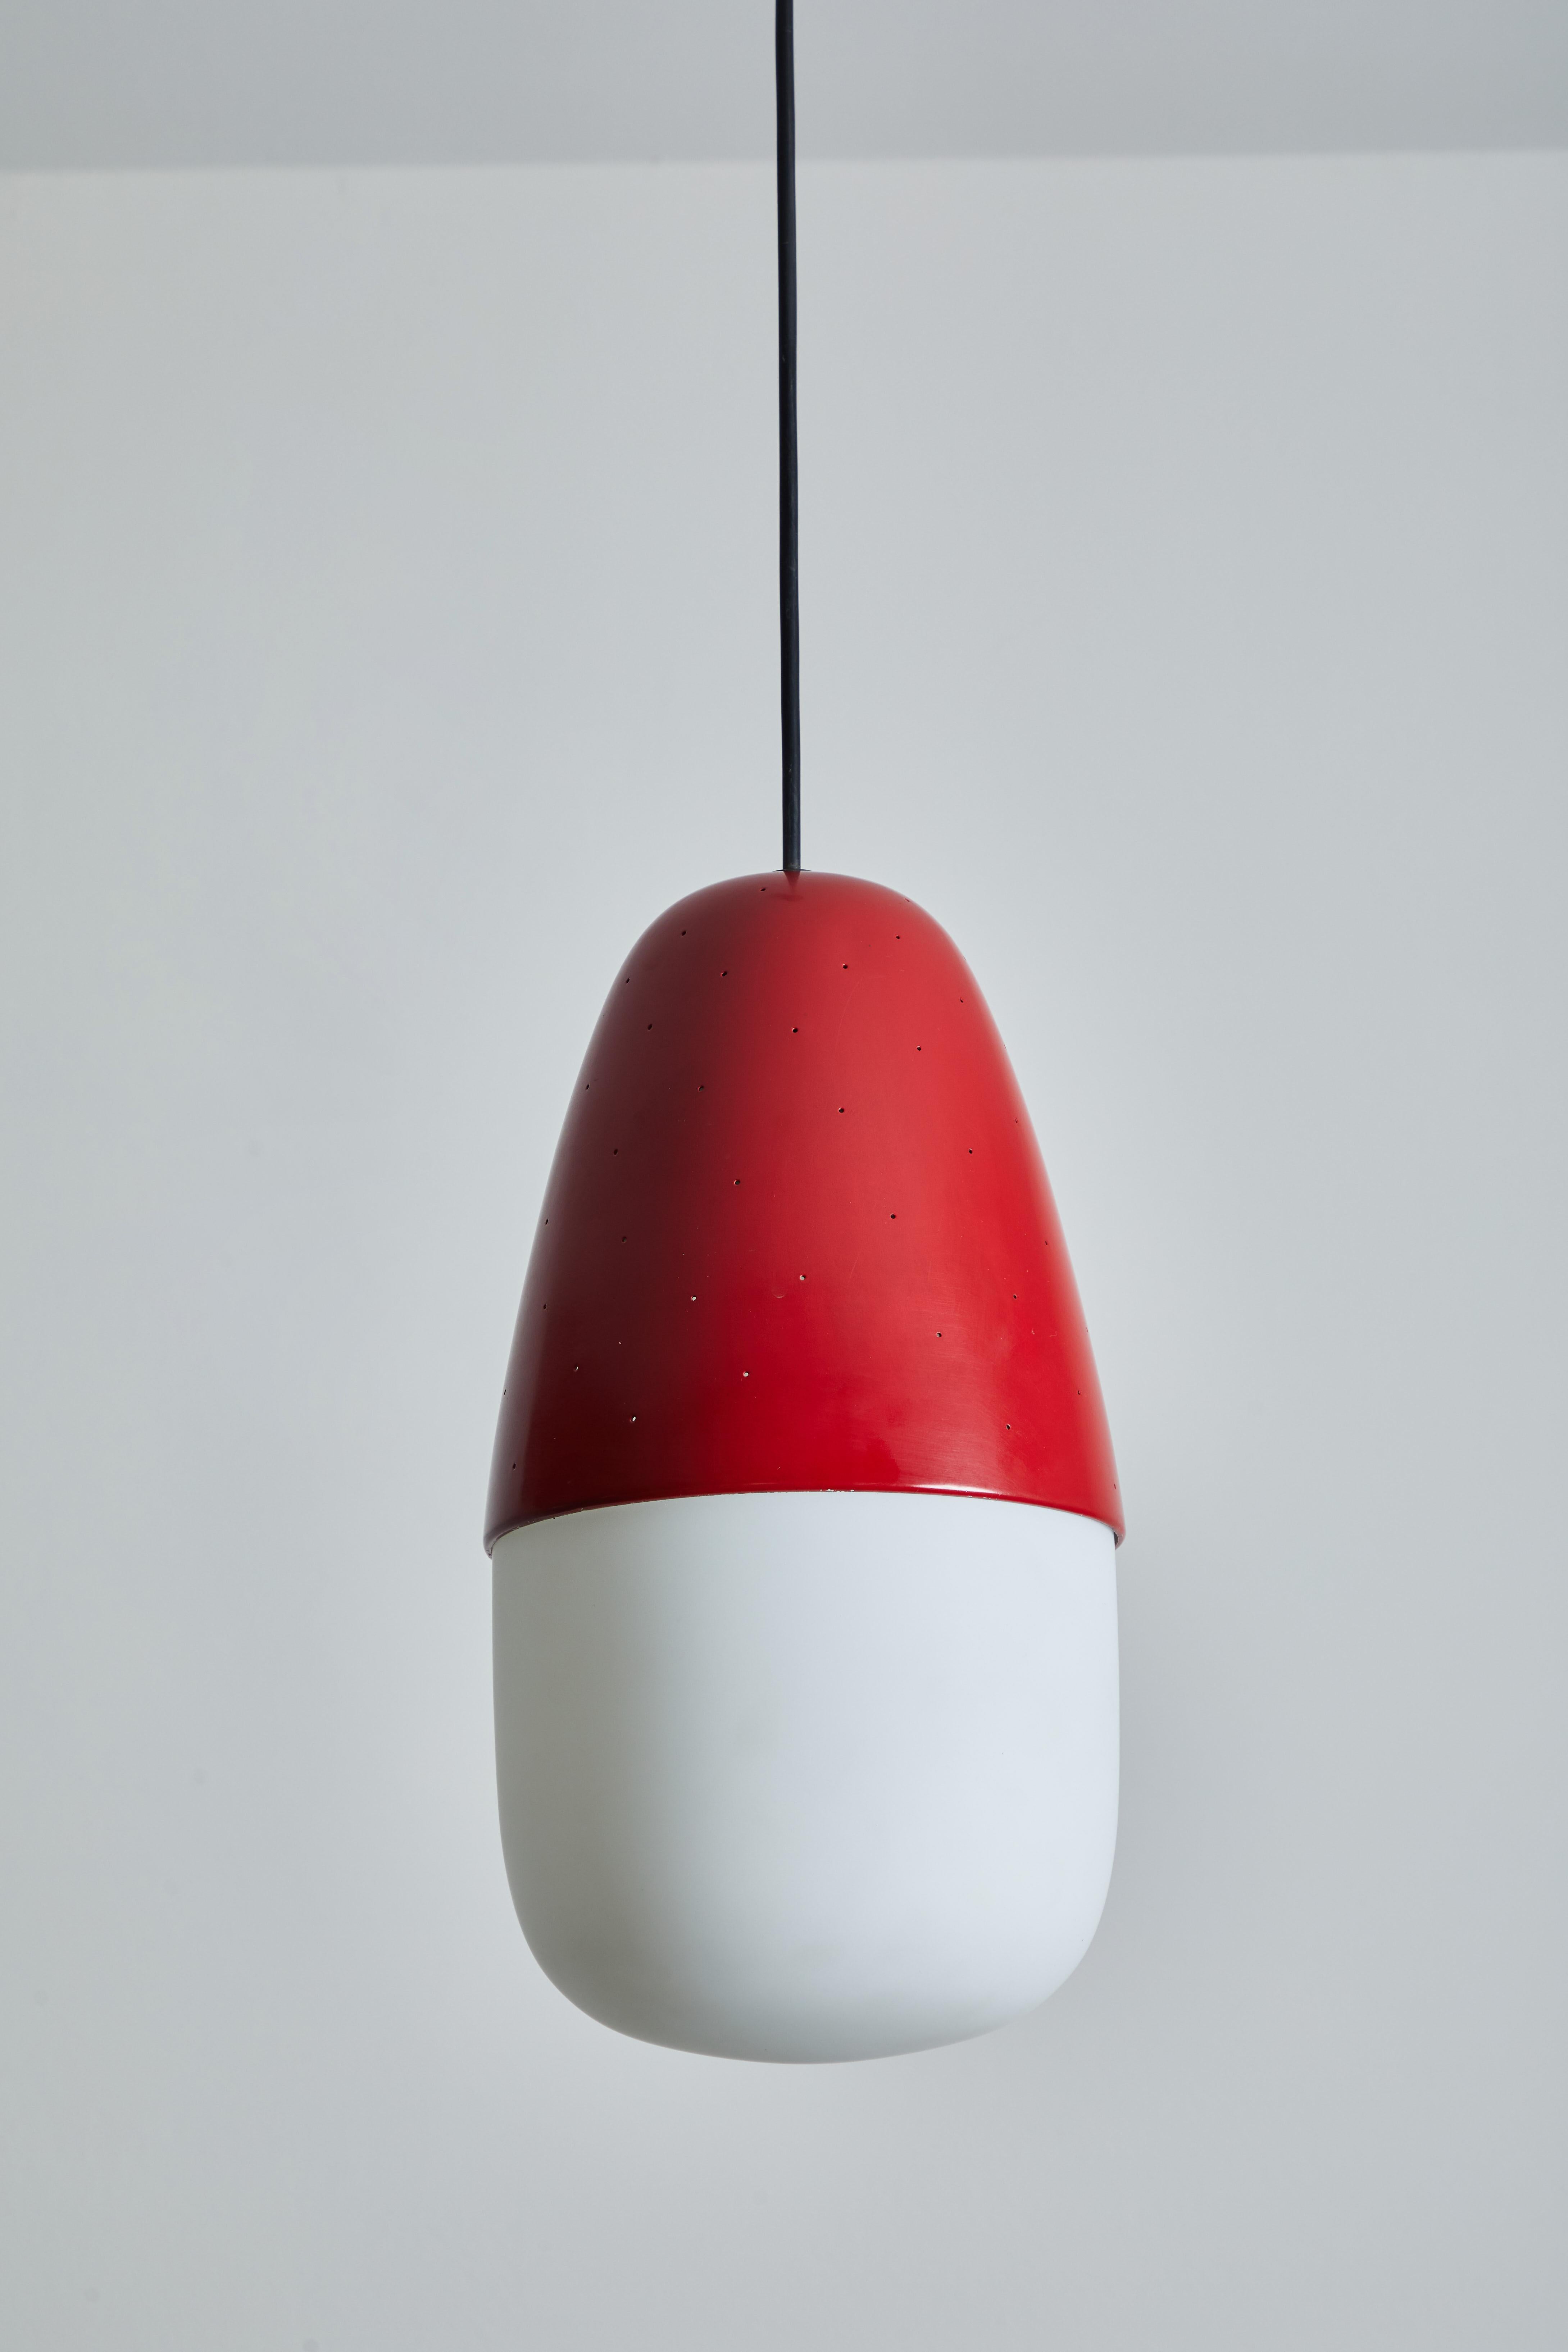 Model 2079 Pendant by Gino Sarfatti for Arteluce For Sale 3